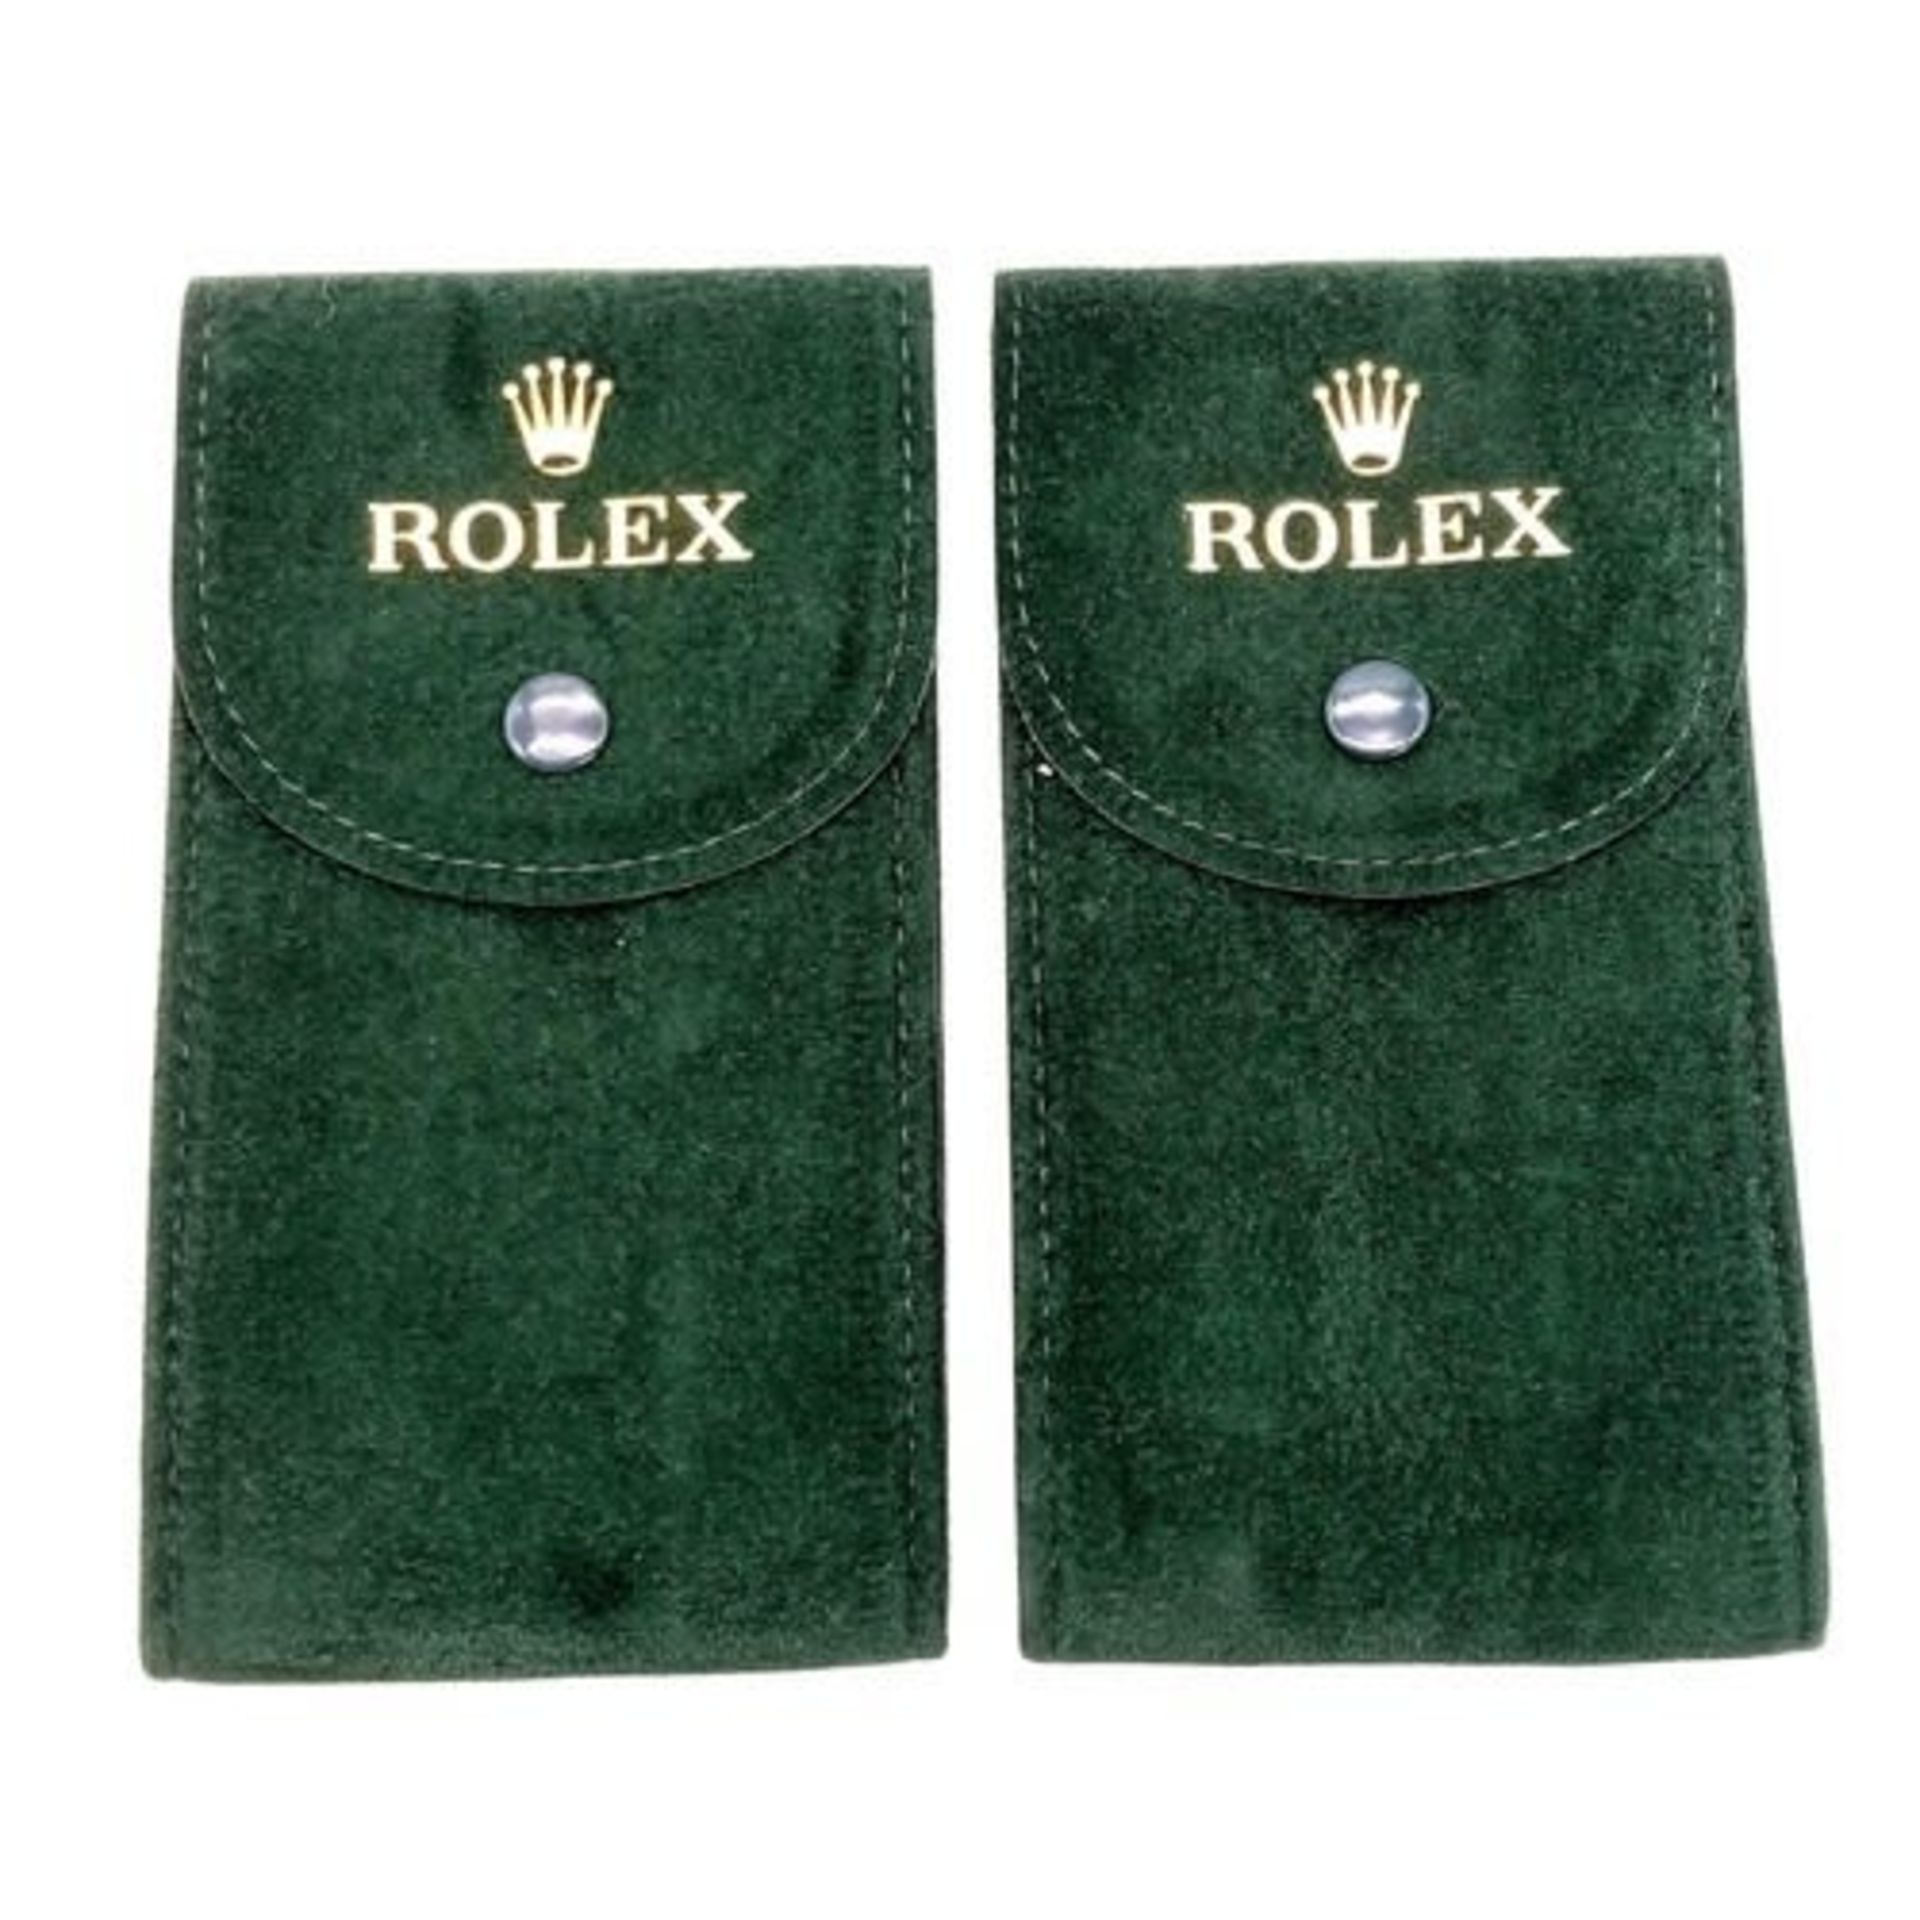 Two Rolex Branded Travelling Watch Cases. Plush green textile exterior. Insert on interior. Both - Image 3 of 4